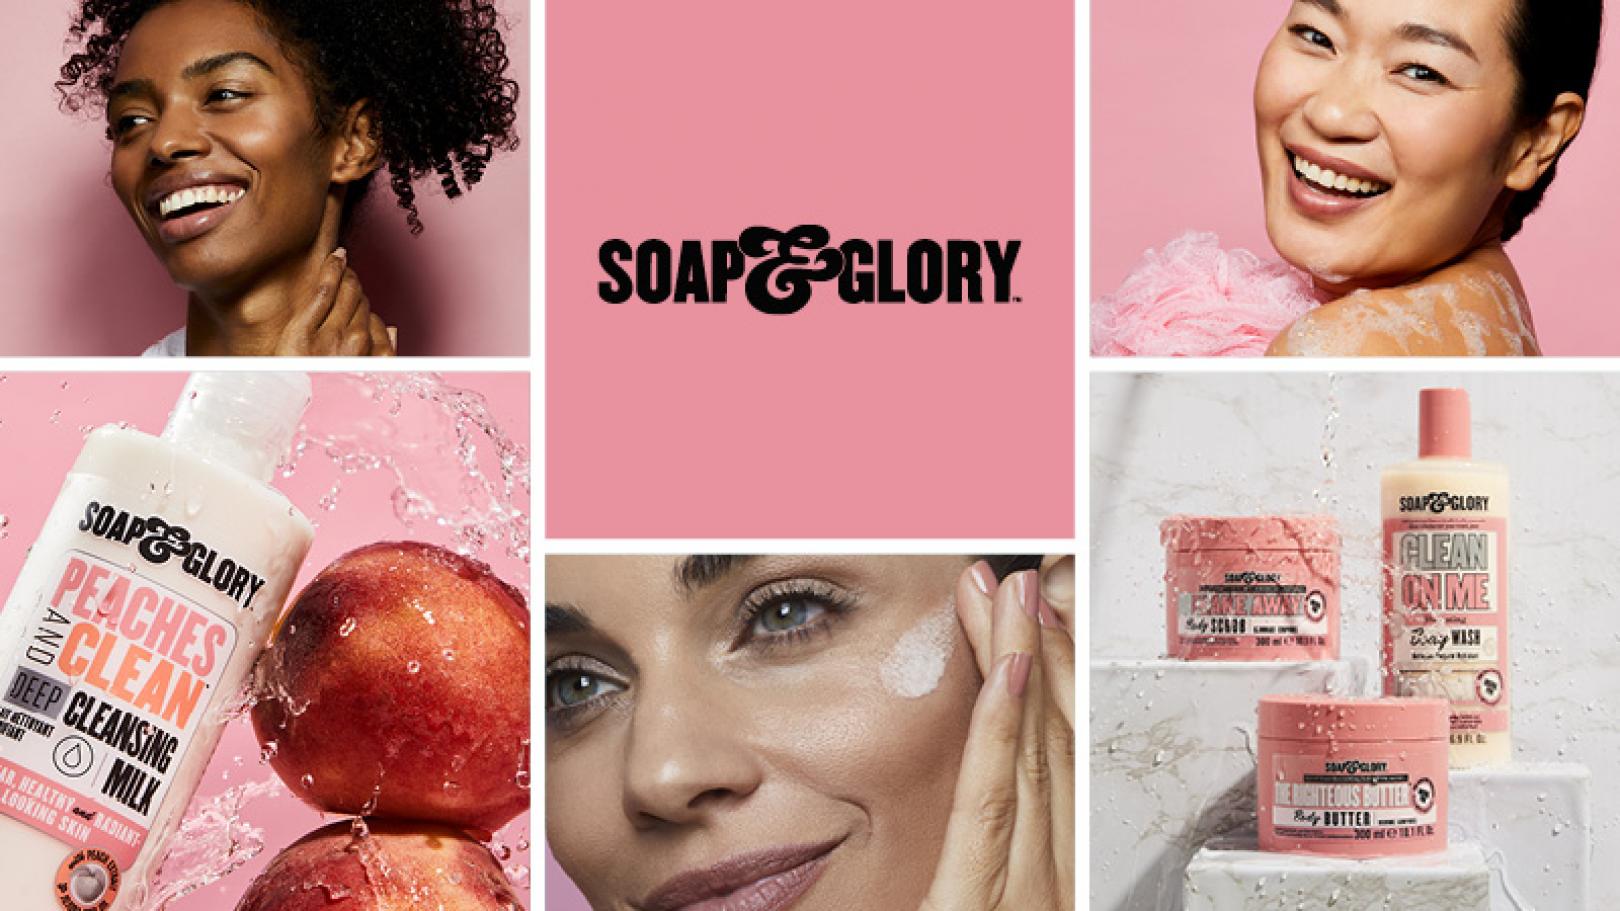 Grid image including Soap & Glory logo, models and product shots